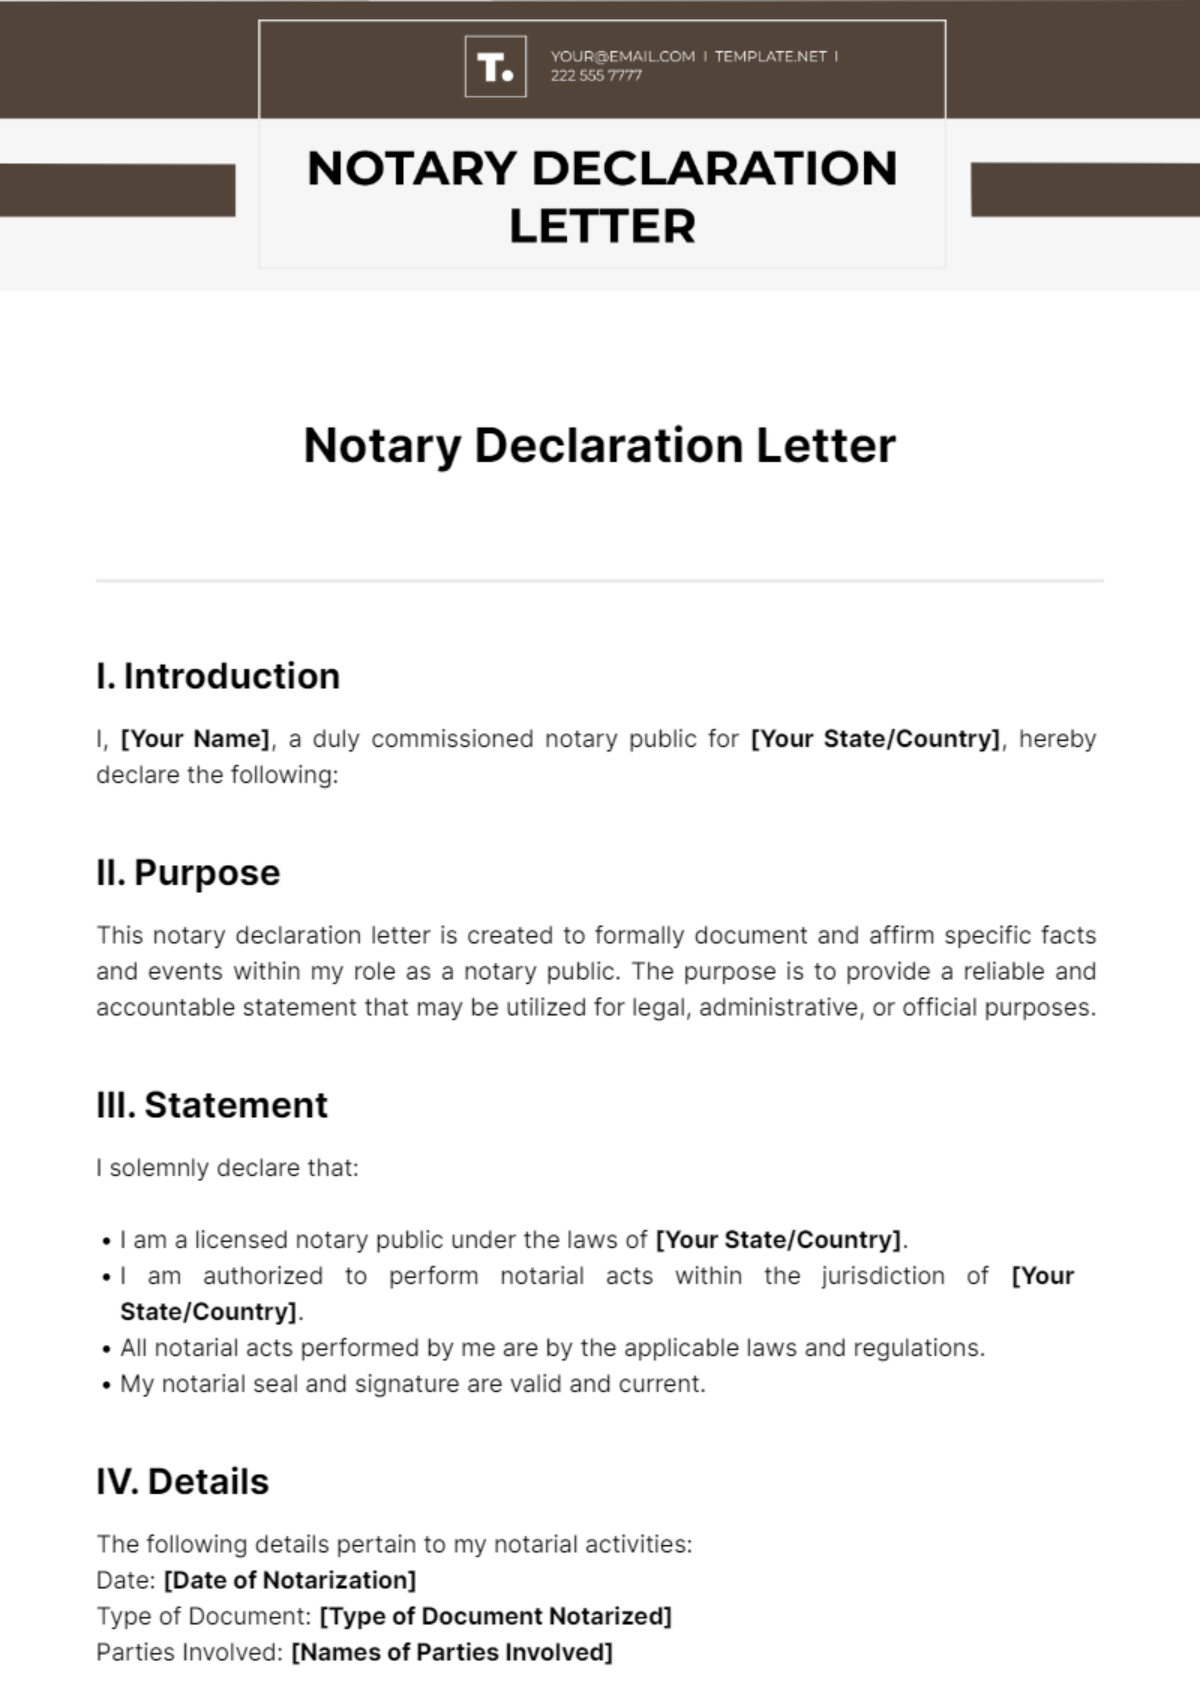 Free Notary Declaration Letter Template